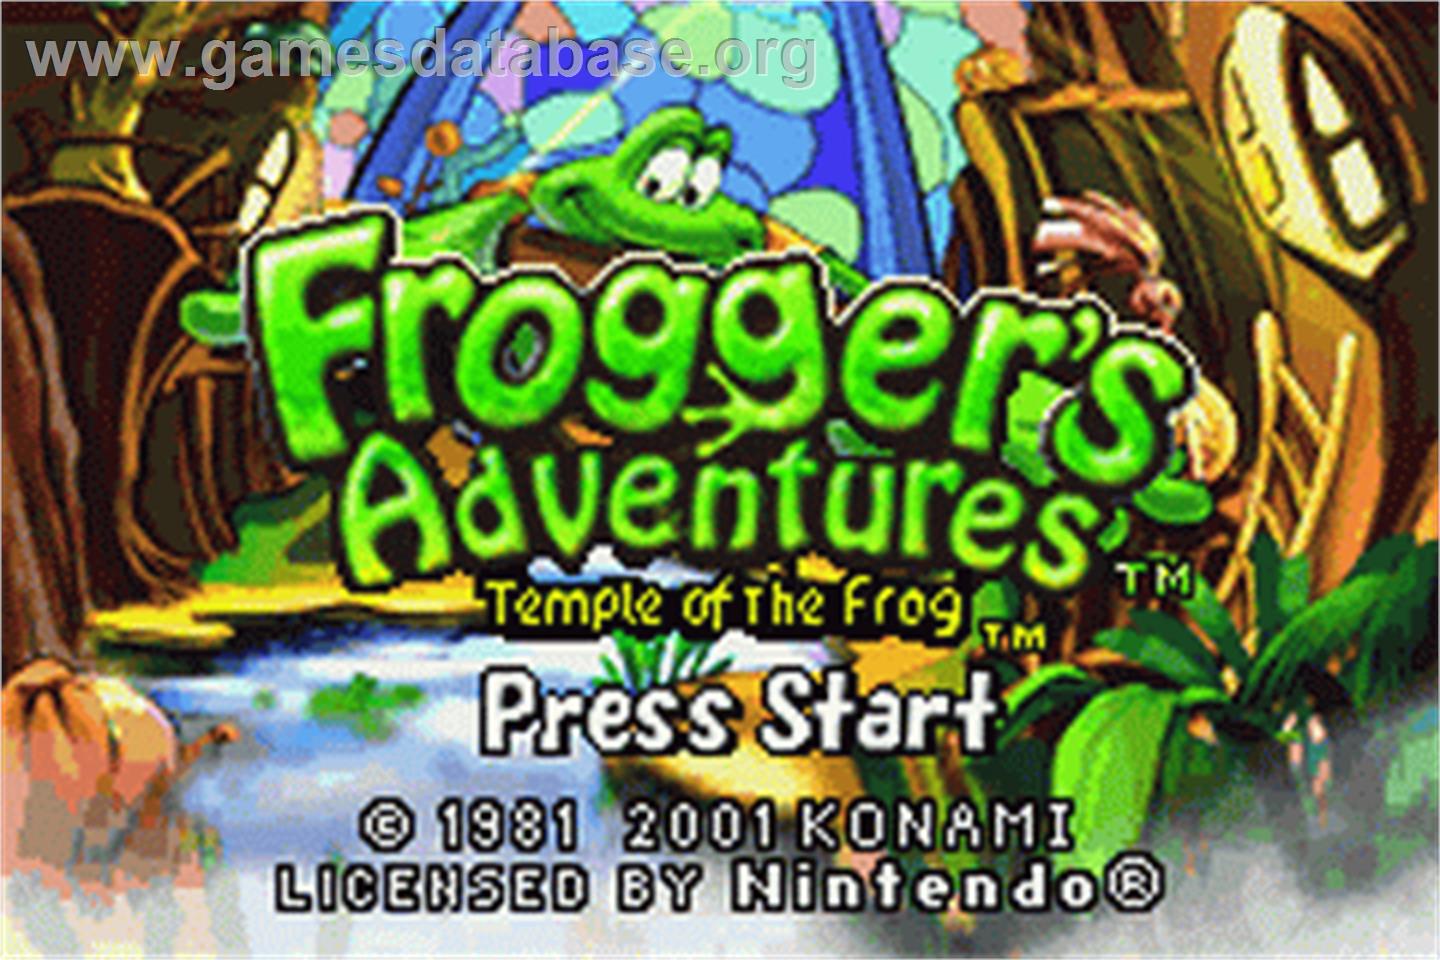 Frogger's Adventures: Temple of the Frog - Nintendo Game Boy Advance - Artwork - Title Screen